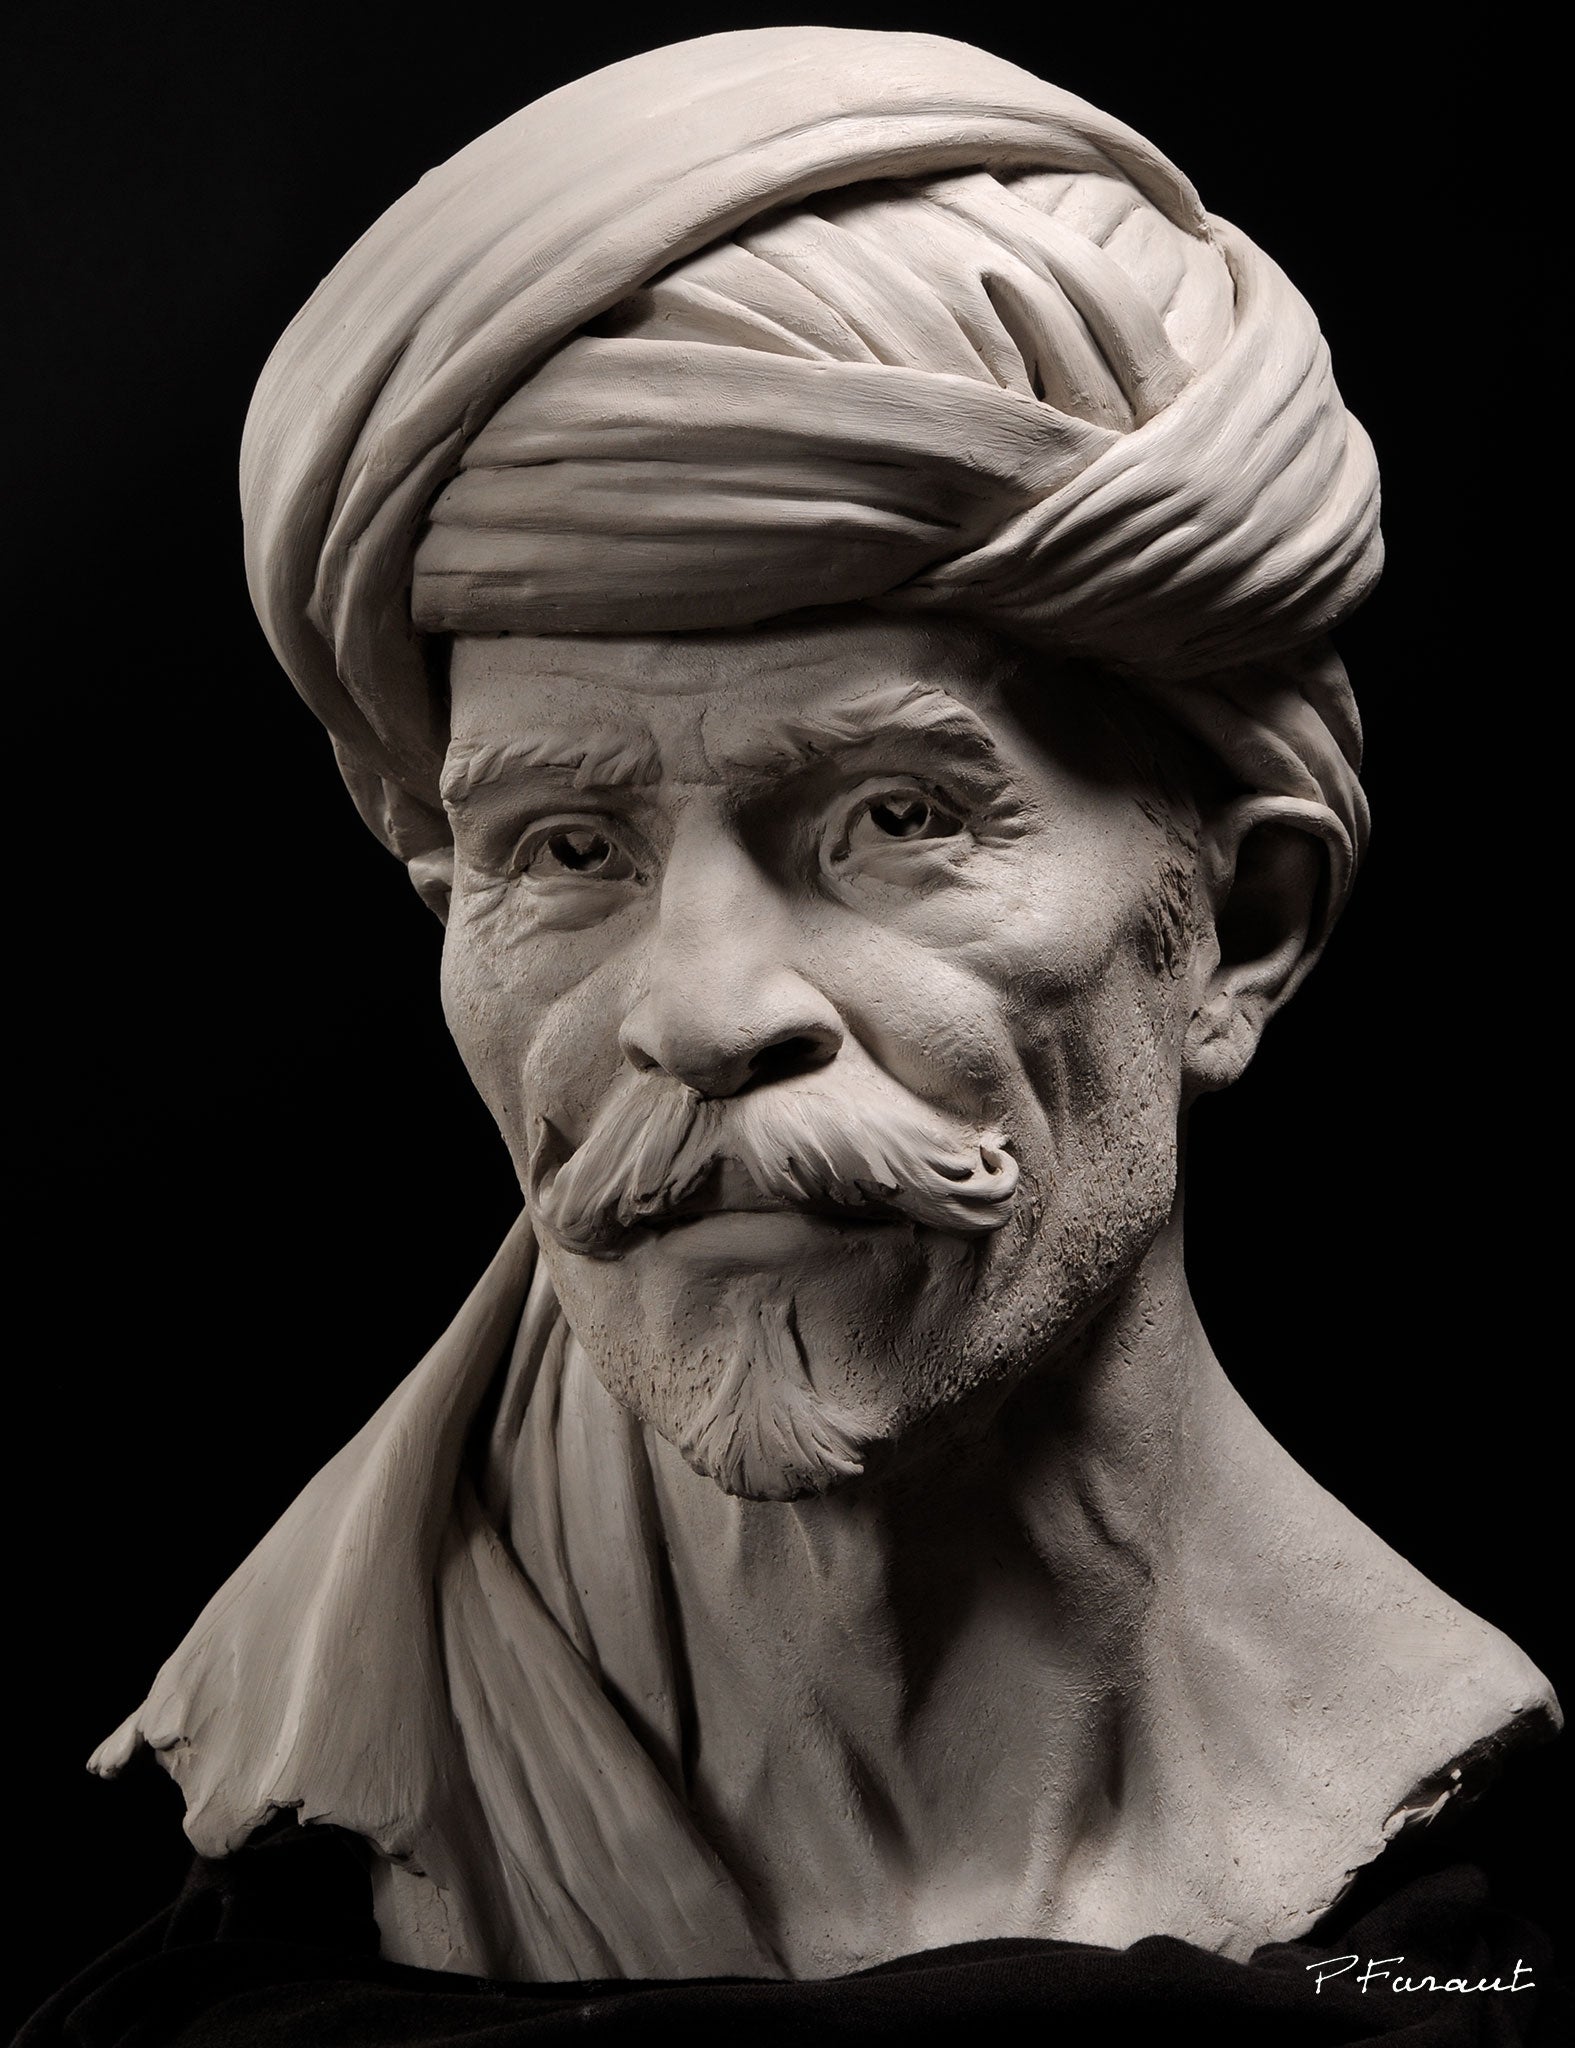 clay portrait of arabian man with turban Bedouin by Philippe Faraut